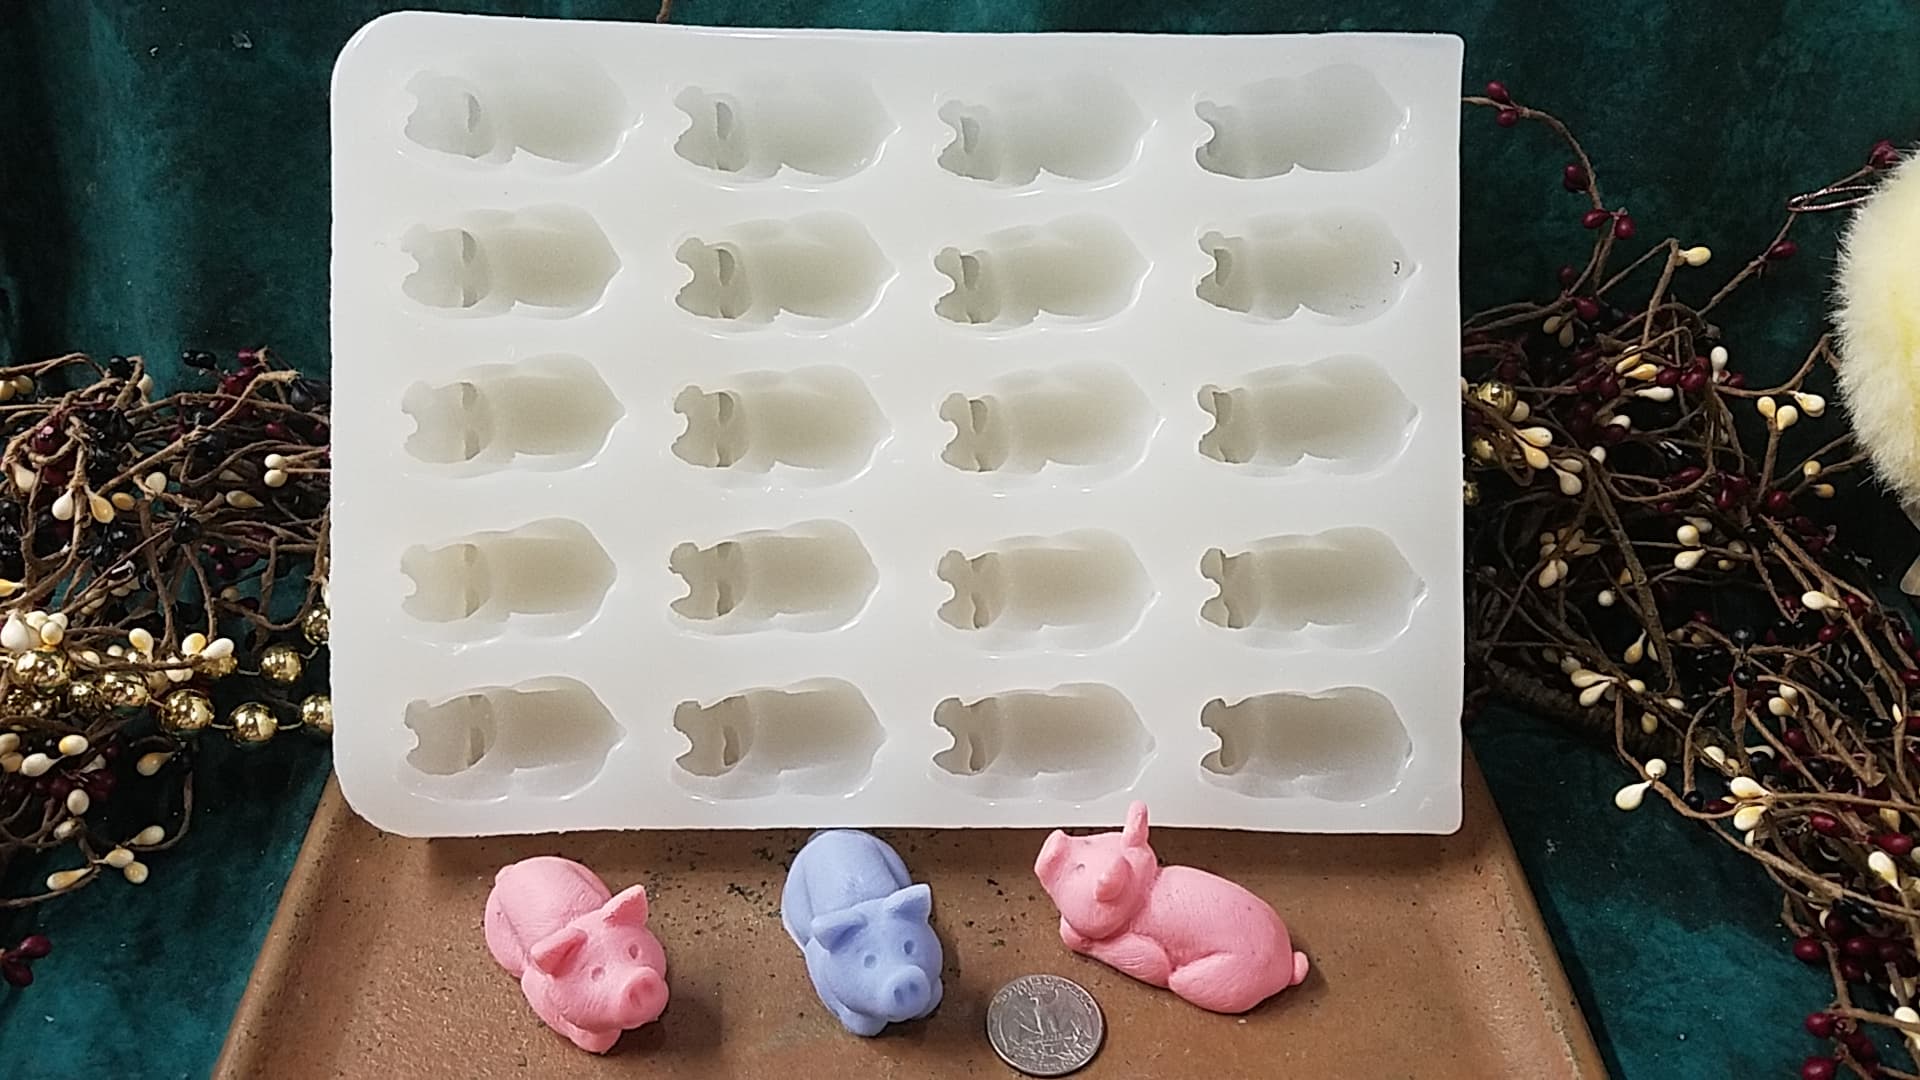 https://www.vanyulay.com/wp-content/uploads/2019/06/Pig-Silicone-Mold.jpg